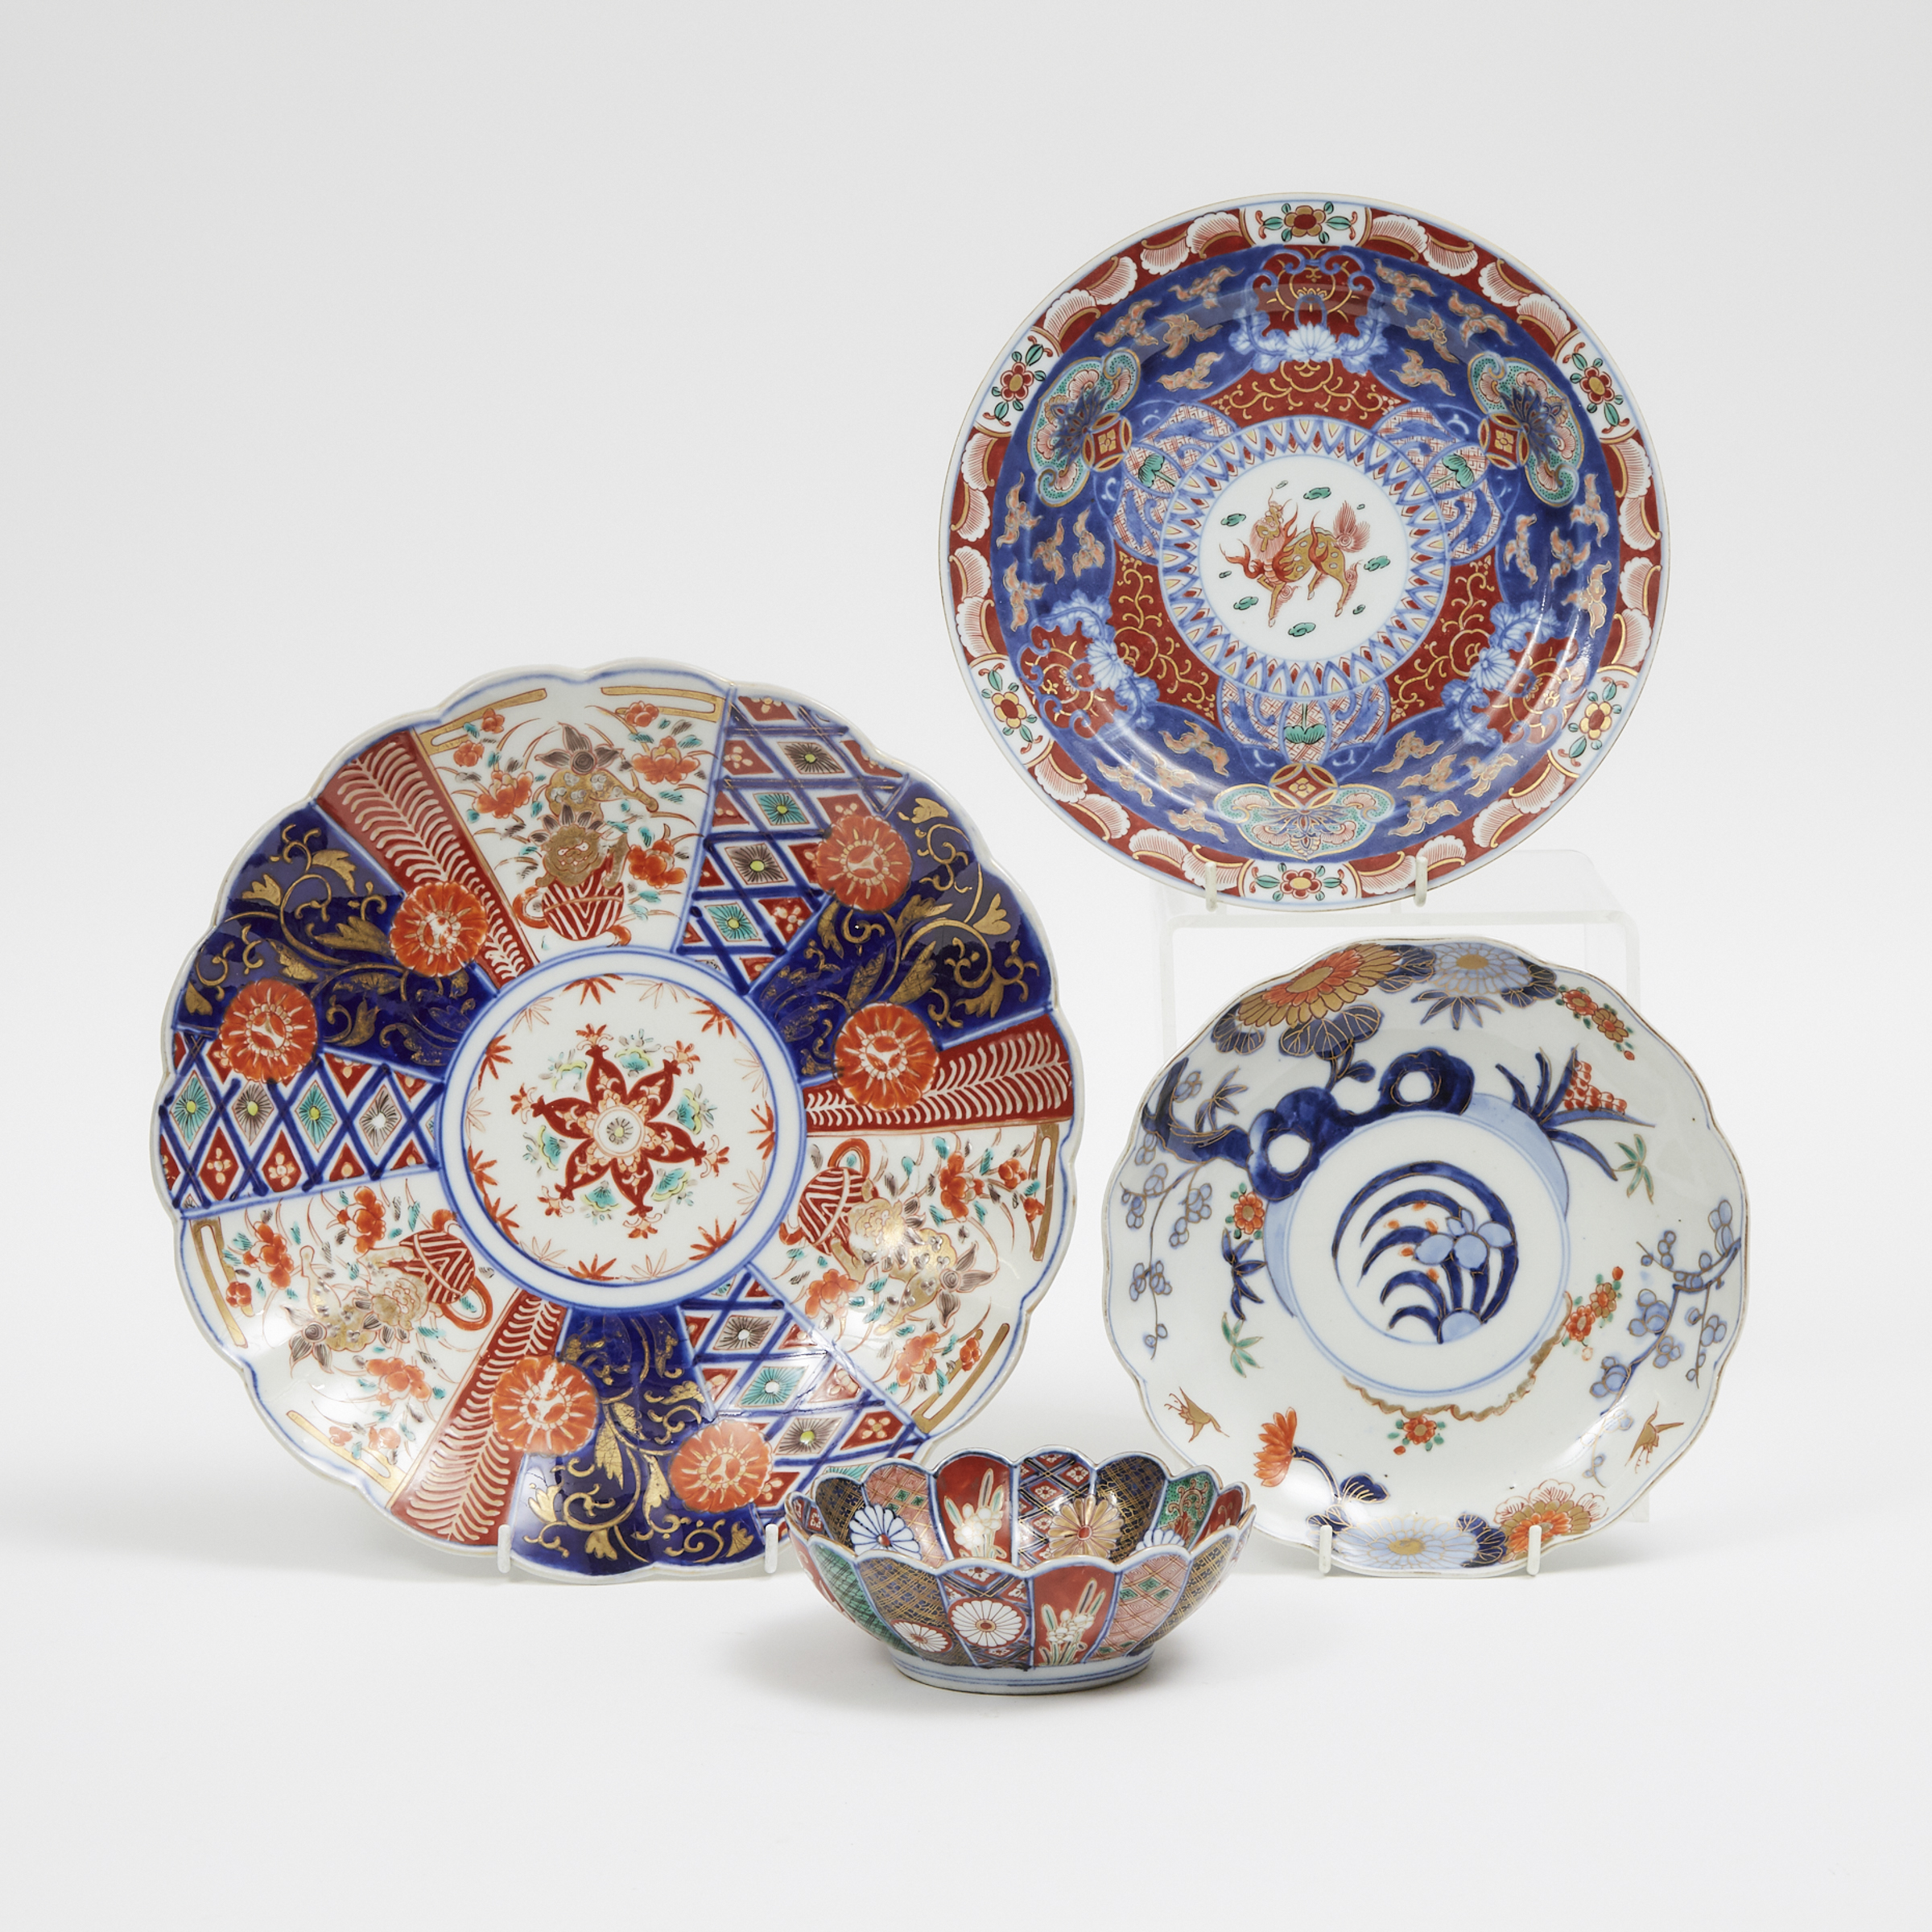 A Group of Four Japanese Imari Wares